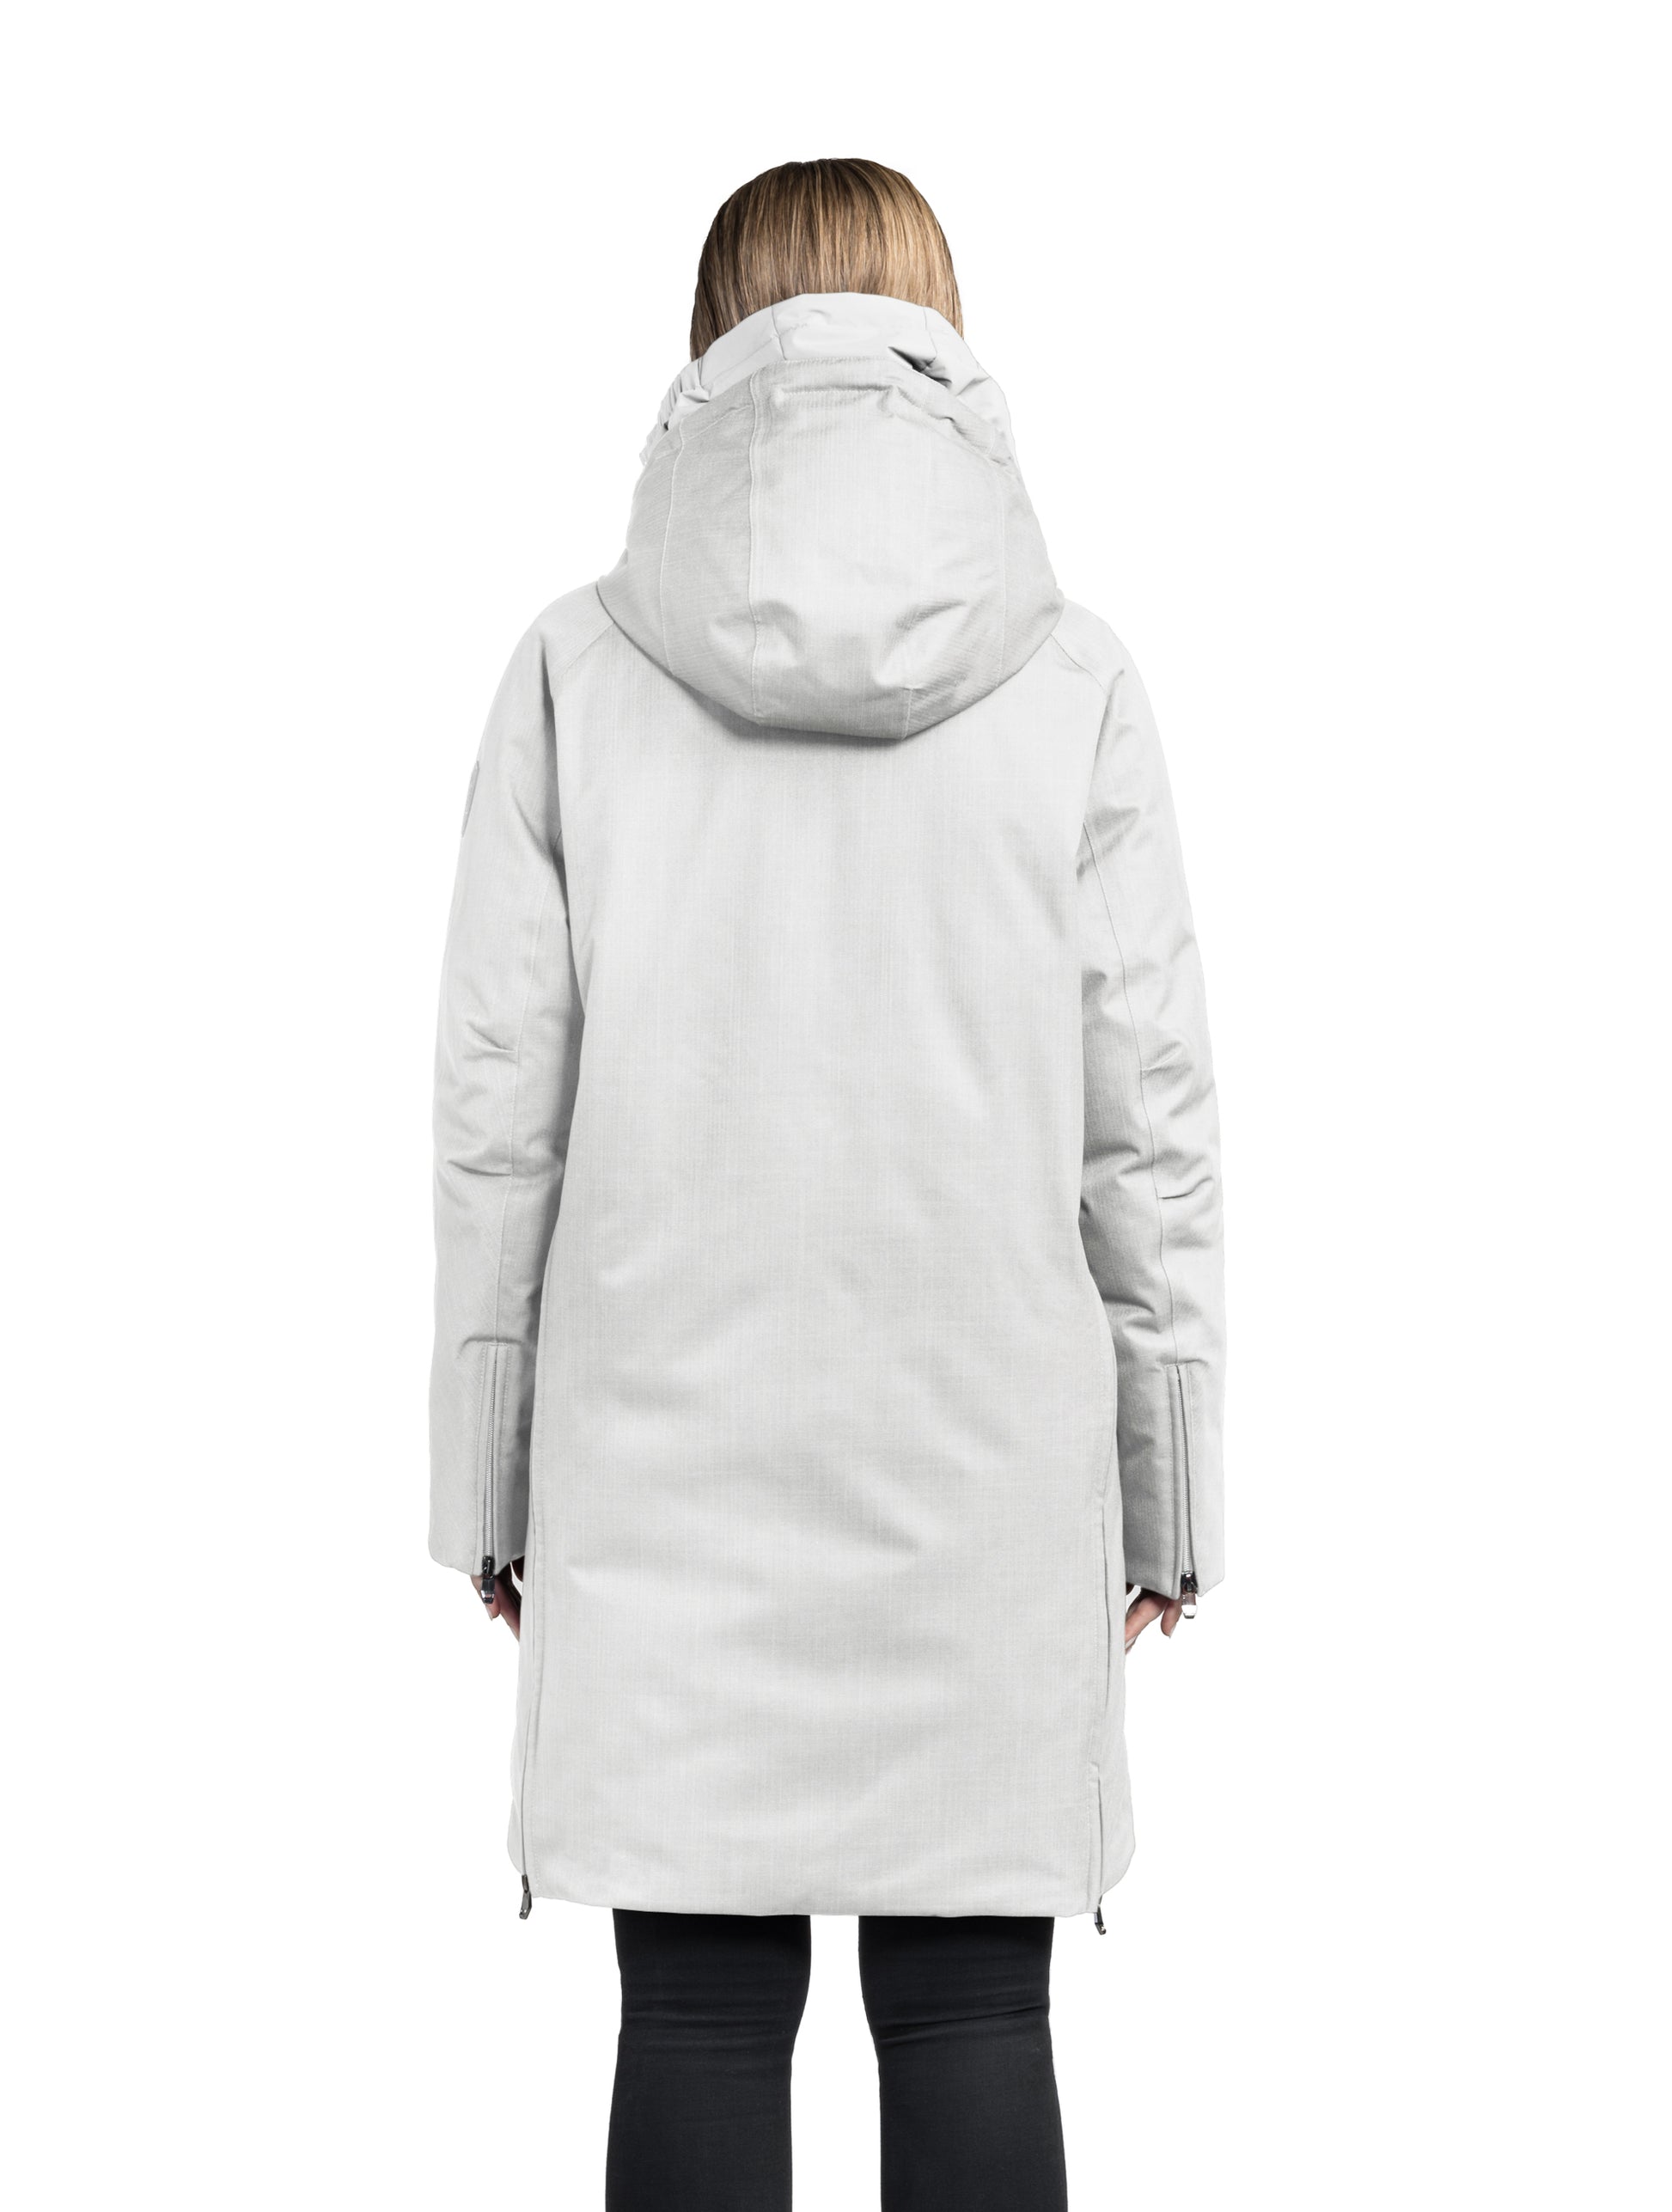 Dory Women's Tailored Back Zip Parka in knee length, premium Crosshatch fabrication, Premium Canadian White Duck Down insulation, non-removable down-filled hood, removable interior hood, centre front two-way zipper with wind flap, vertical zipper detailing along back, in Light Grey